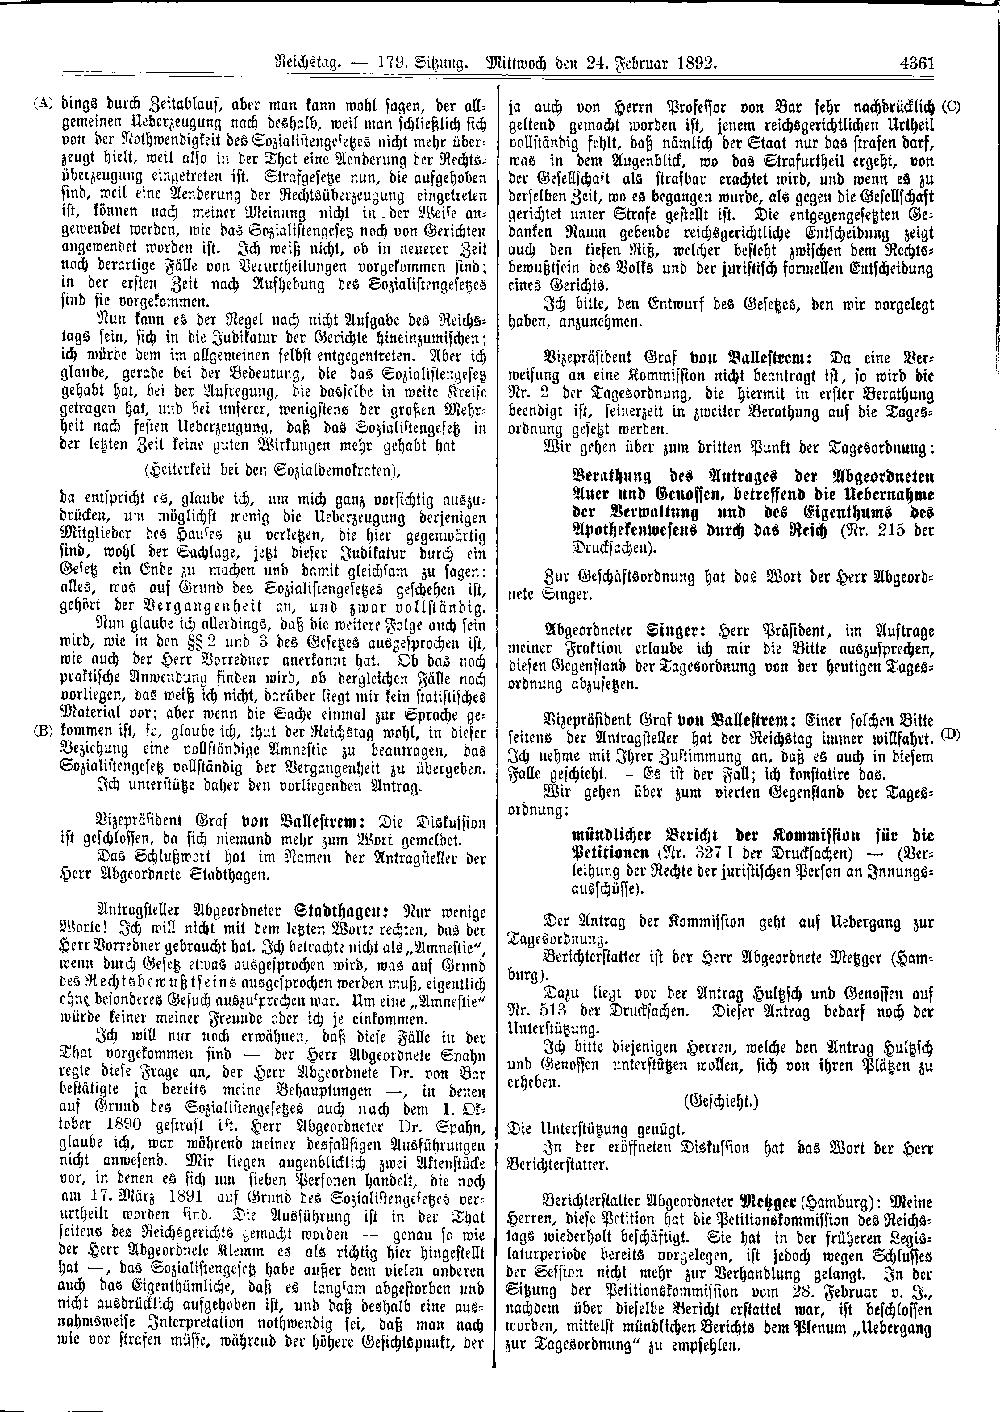 Scan of page 4361